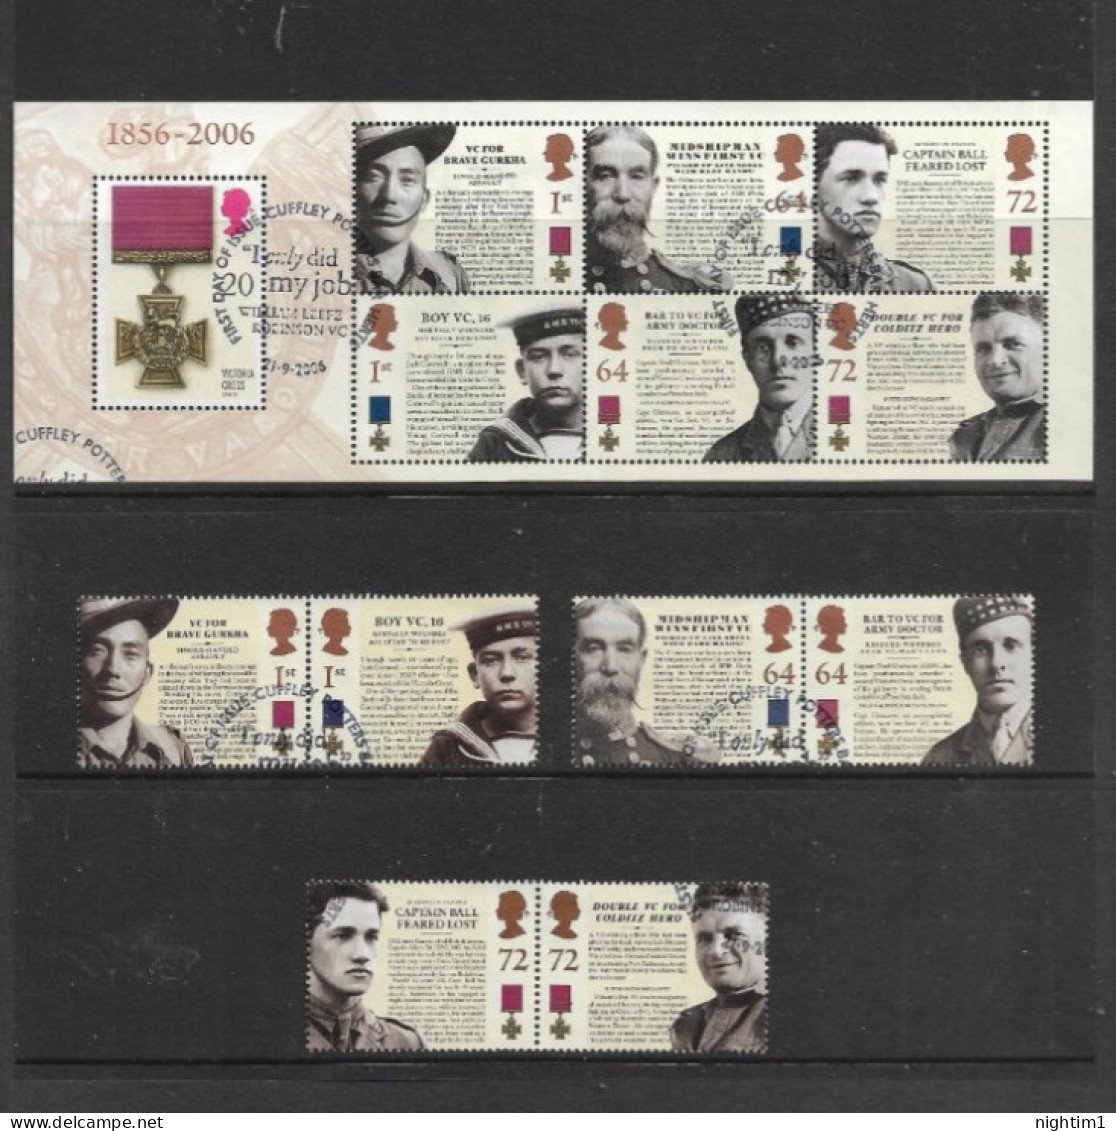 GREAT BRITAIN COLLECTION. VICTORIA CROSS SET OF 6 AND SOUVENIR SHEET. USED. - Gebraucht